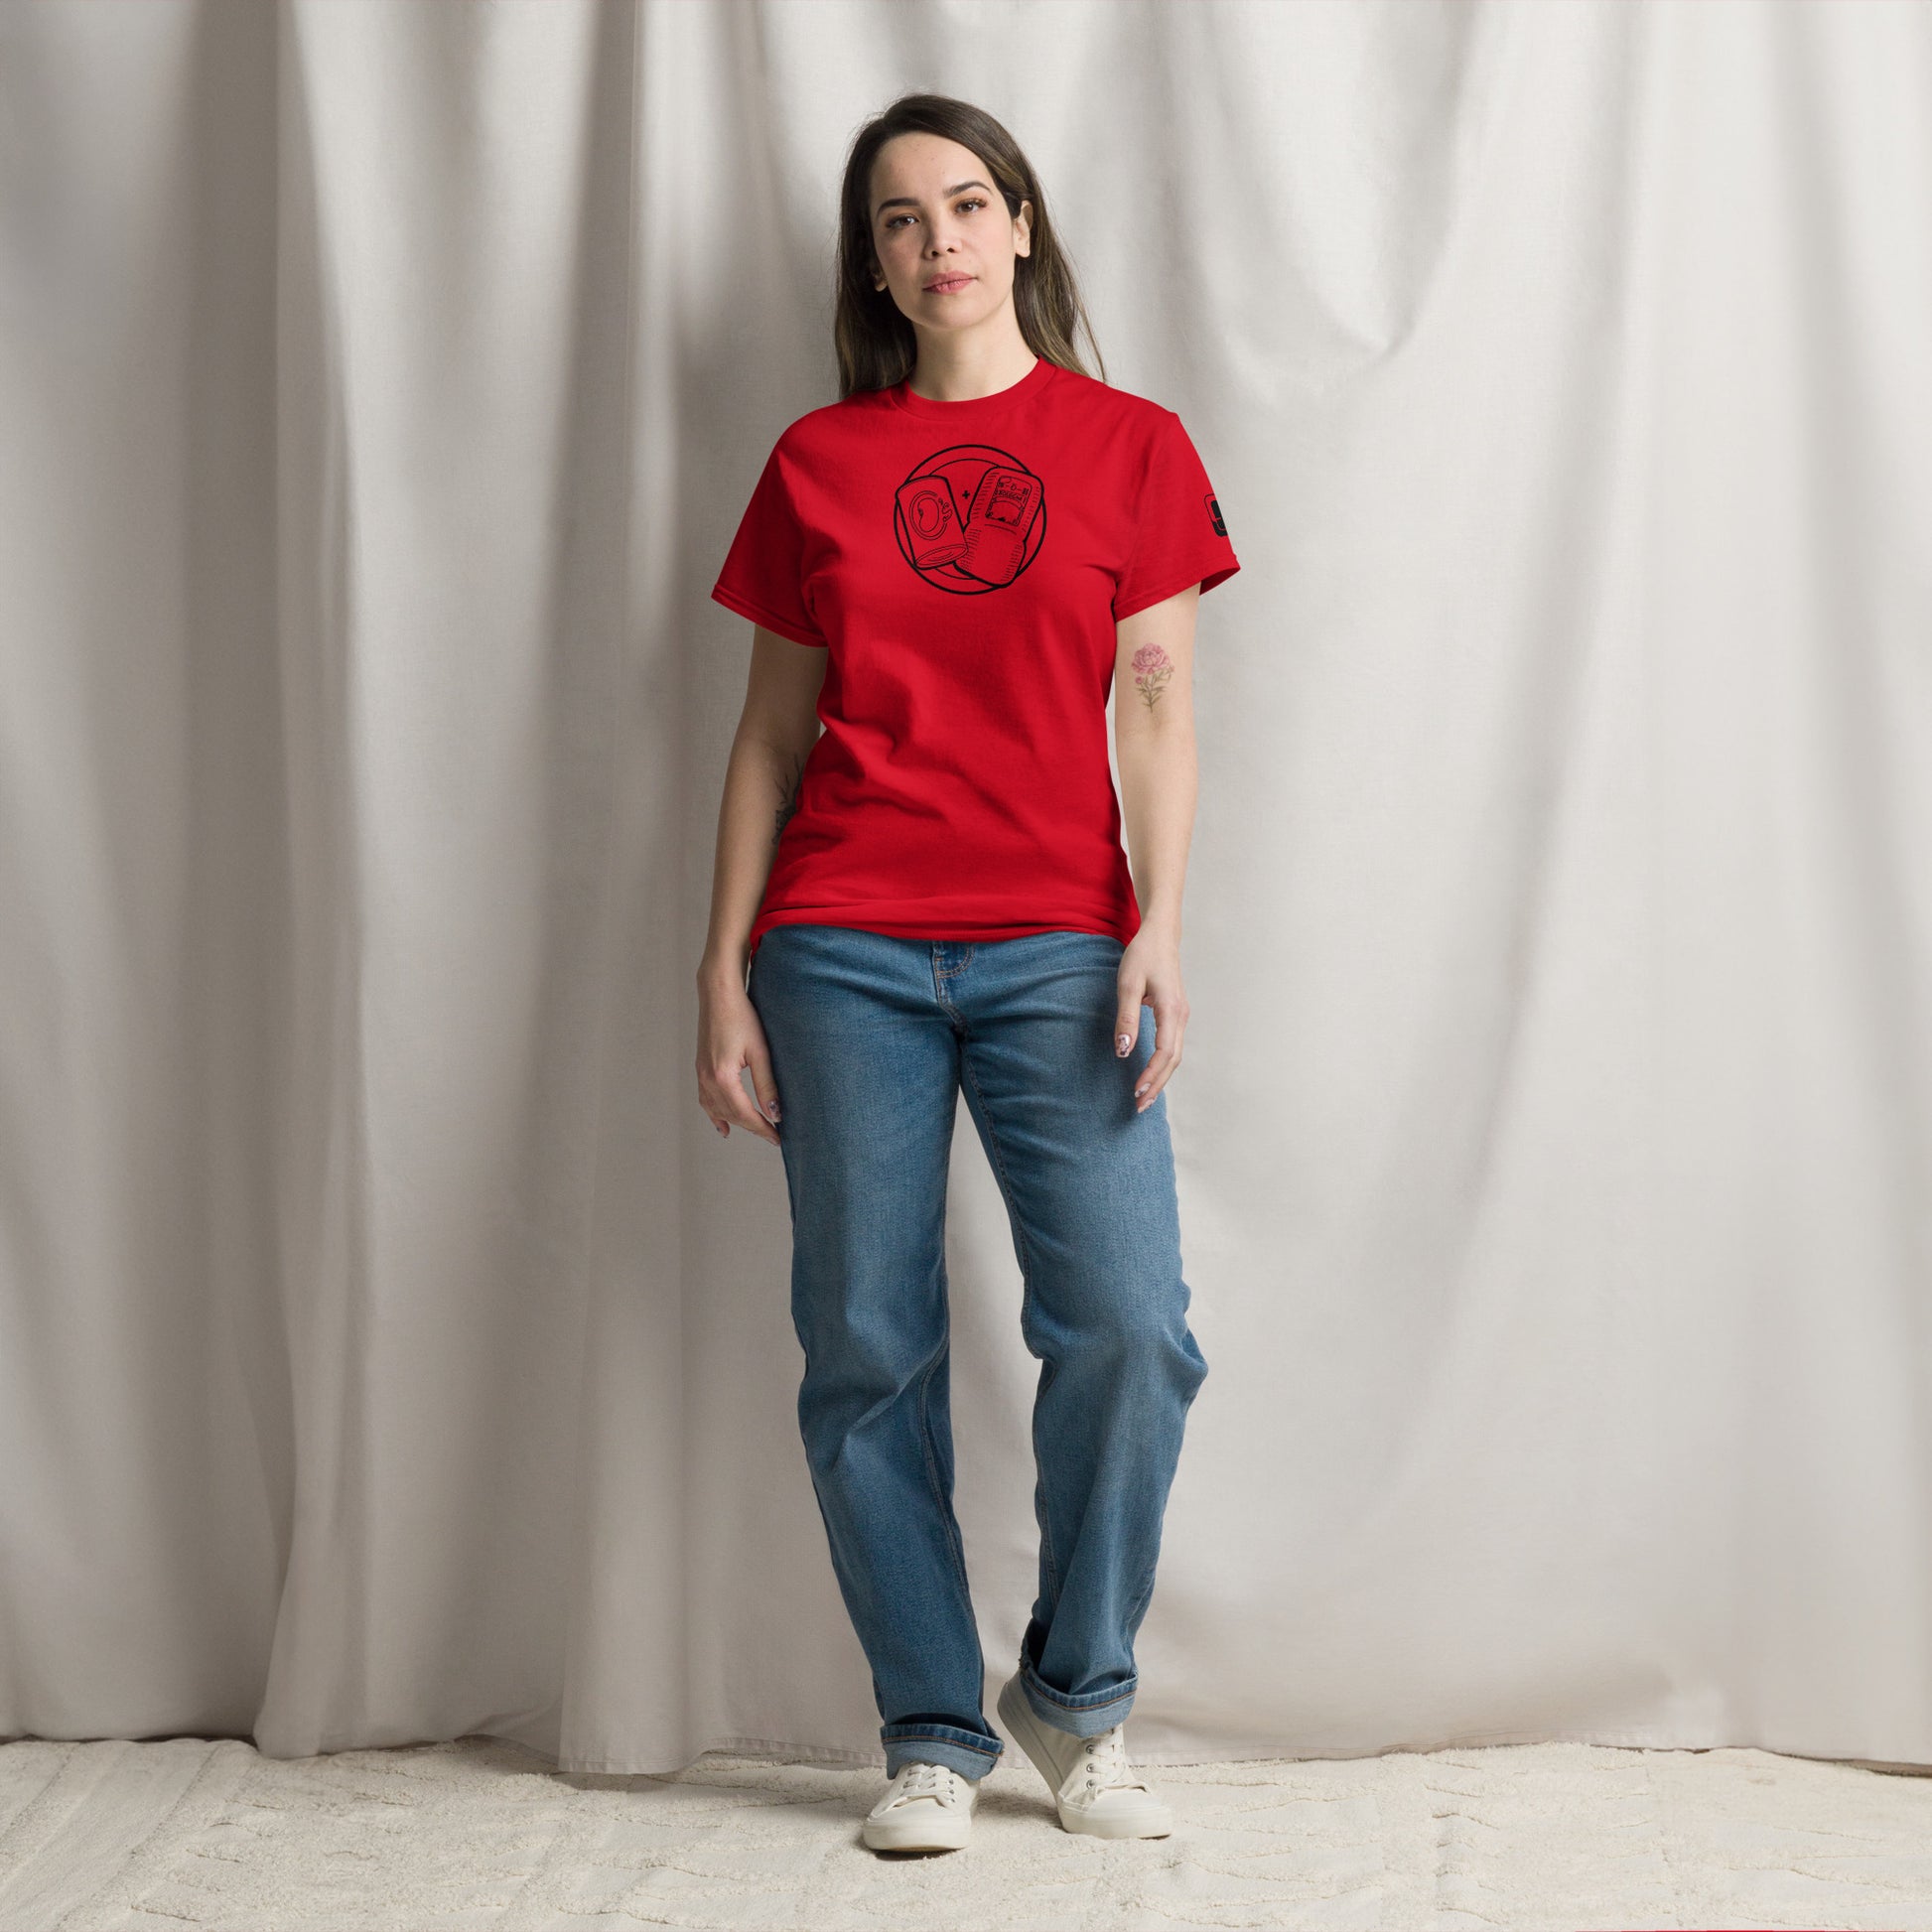 A woman stands confidently in a red t-shirt featuring a circular emblem in black line art, which includes a can of beans and some bologna with a "+" sign between them. She pairs the shirt with blue jeans and white sneakers. The t-shirt also has a small logo patch on the right sleeve. She poses against a neutral draped fabric background, giving the image a relaxed, casual vibe that emphasizes the shirt's playful and stylish design.